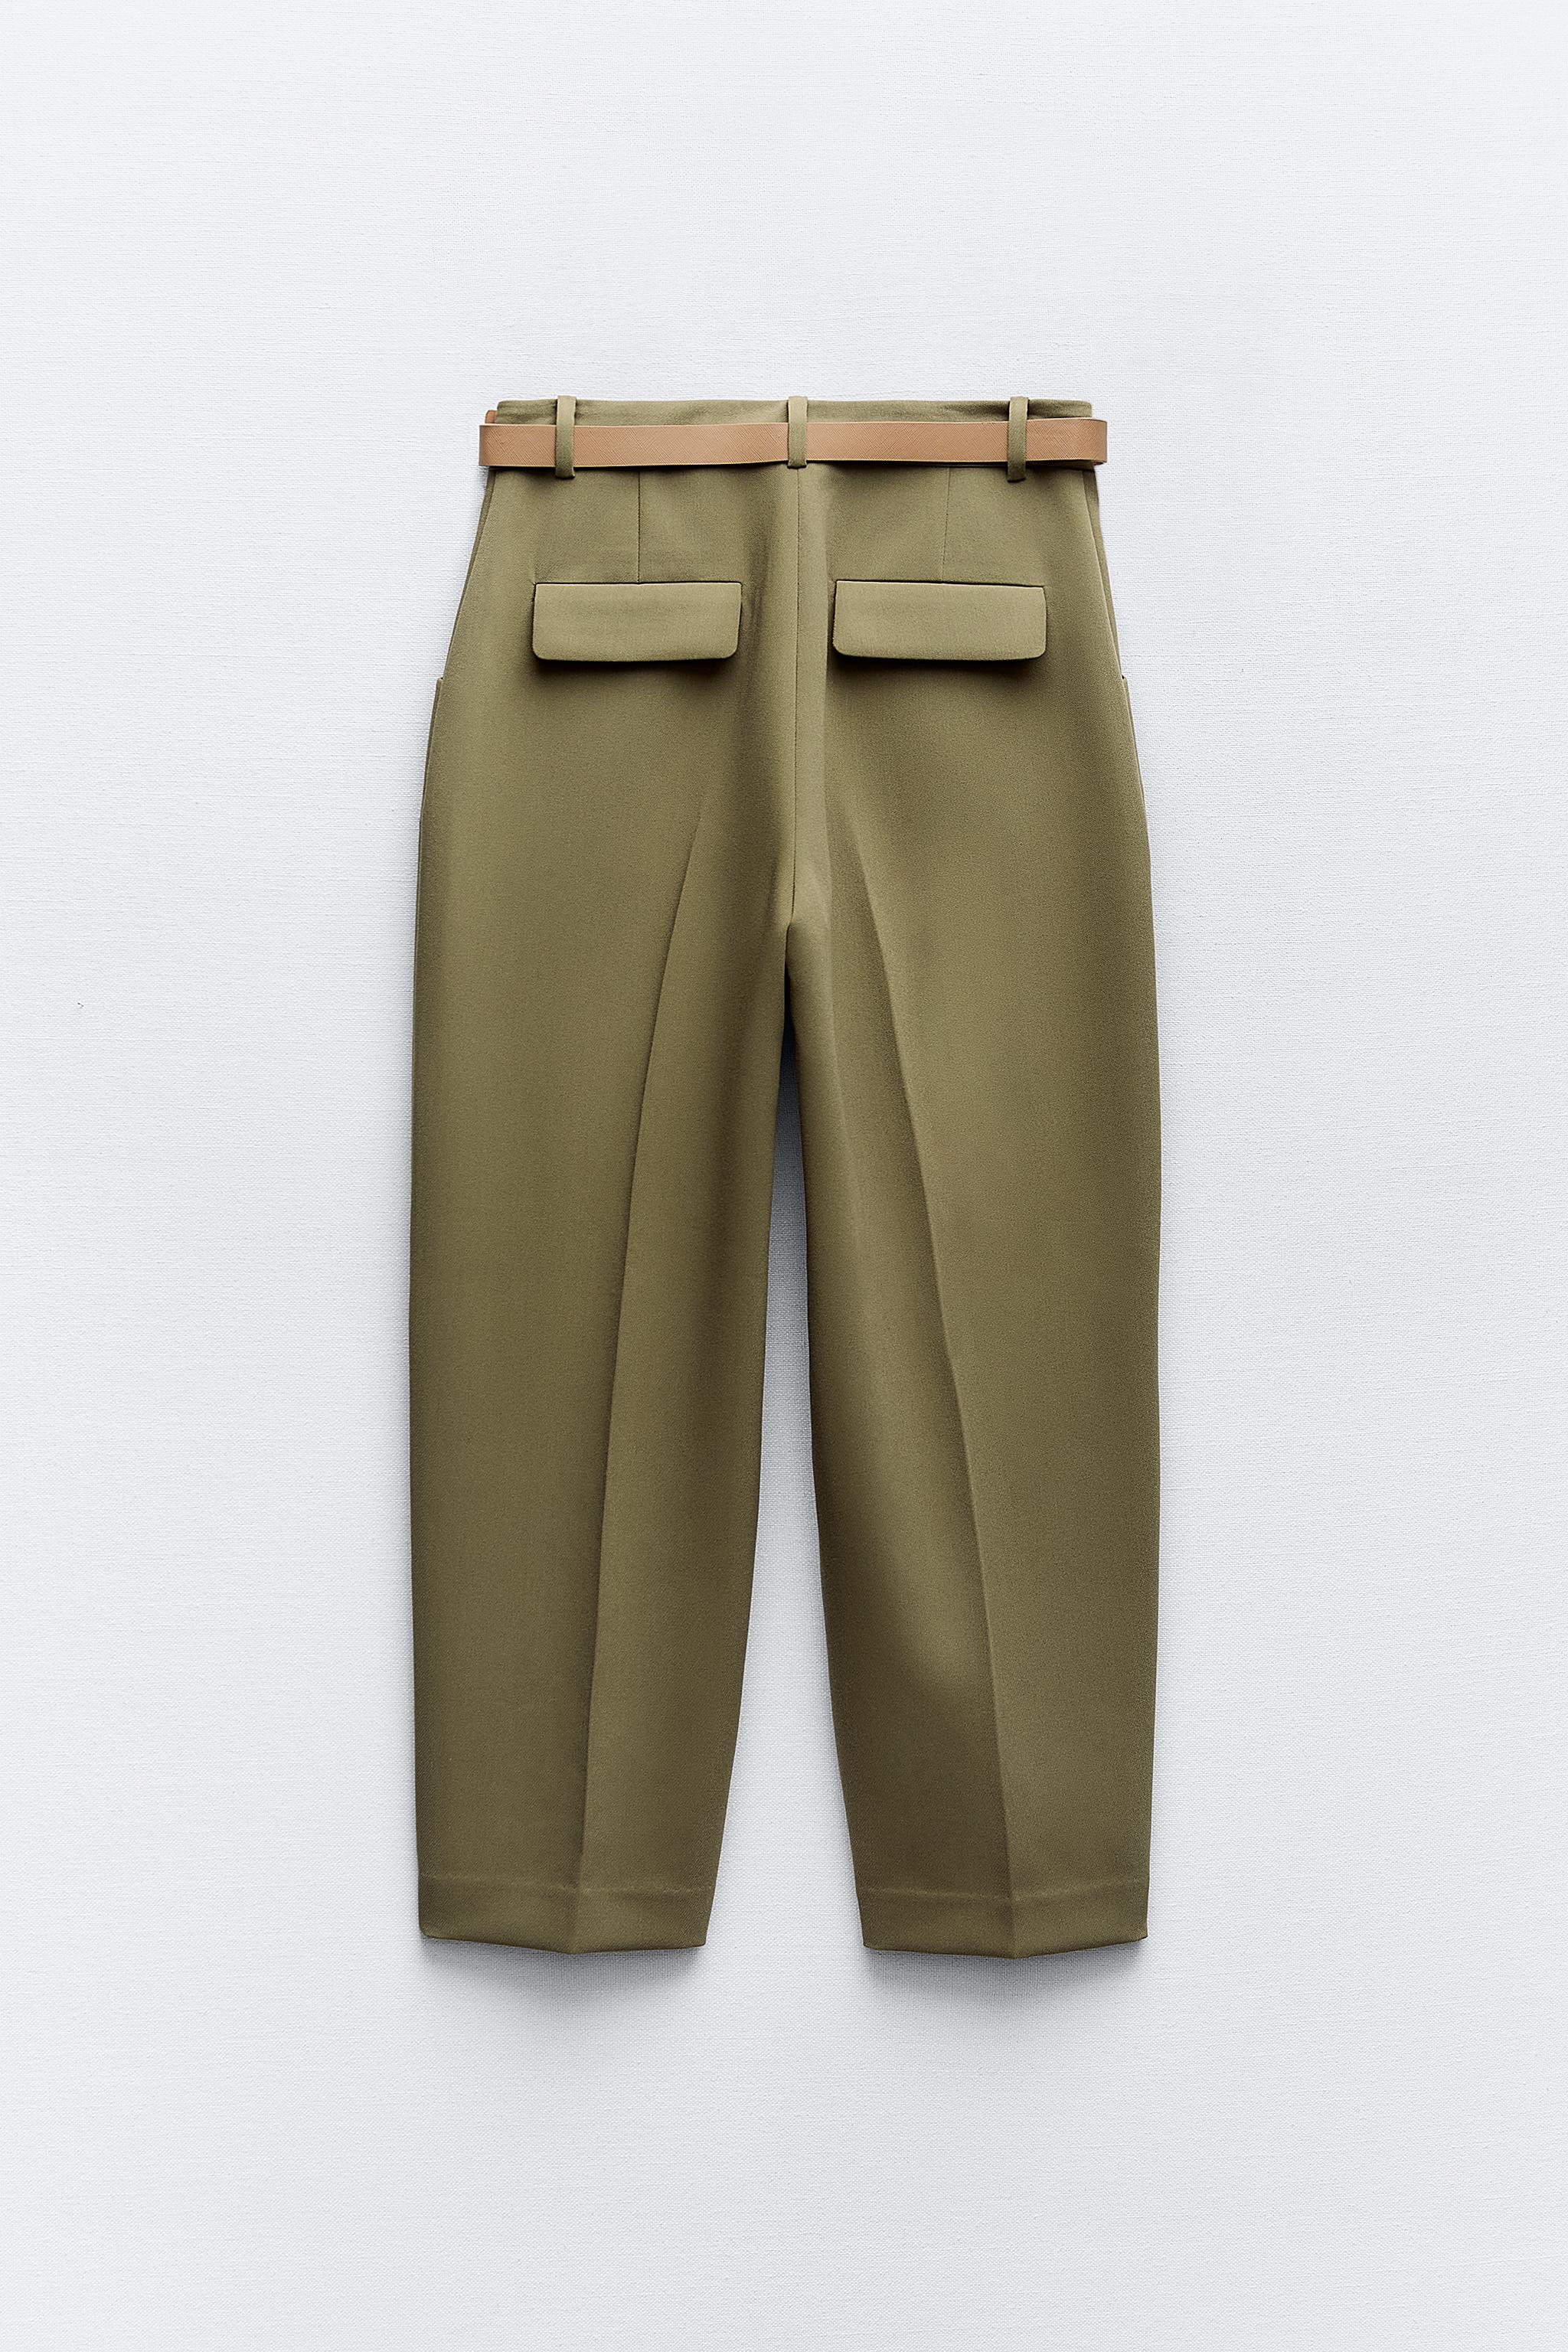 ZARA High Waisted Belted Trousers Buttoned Pants with Belt Medium